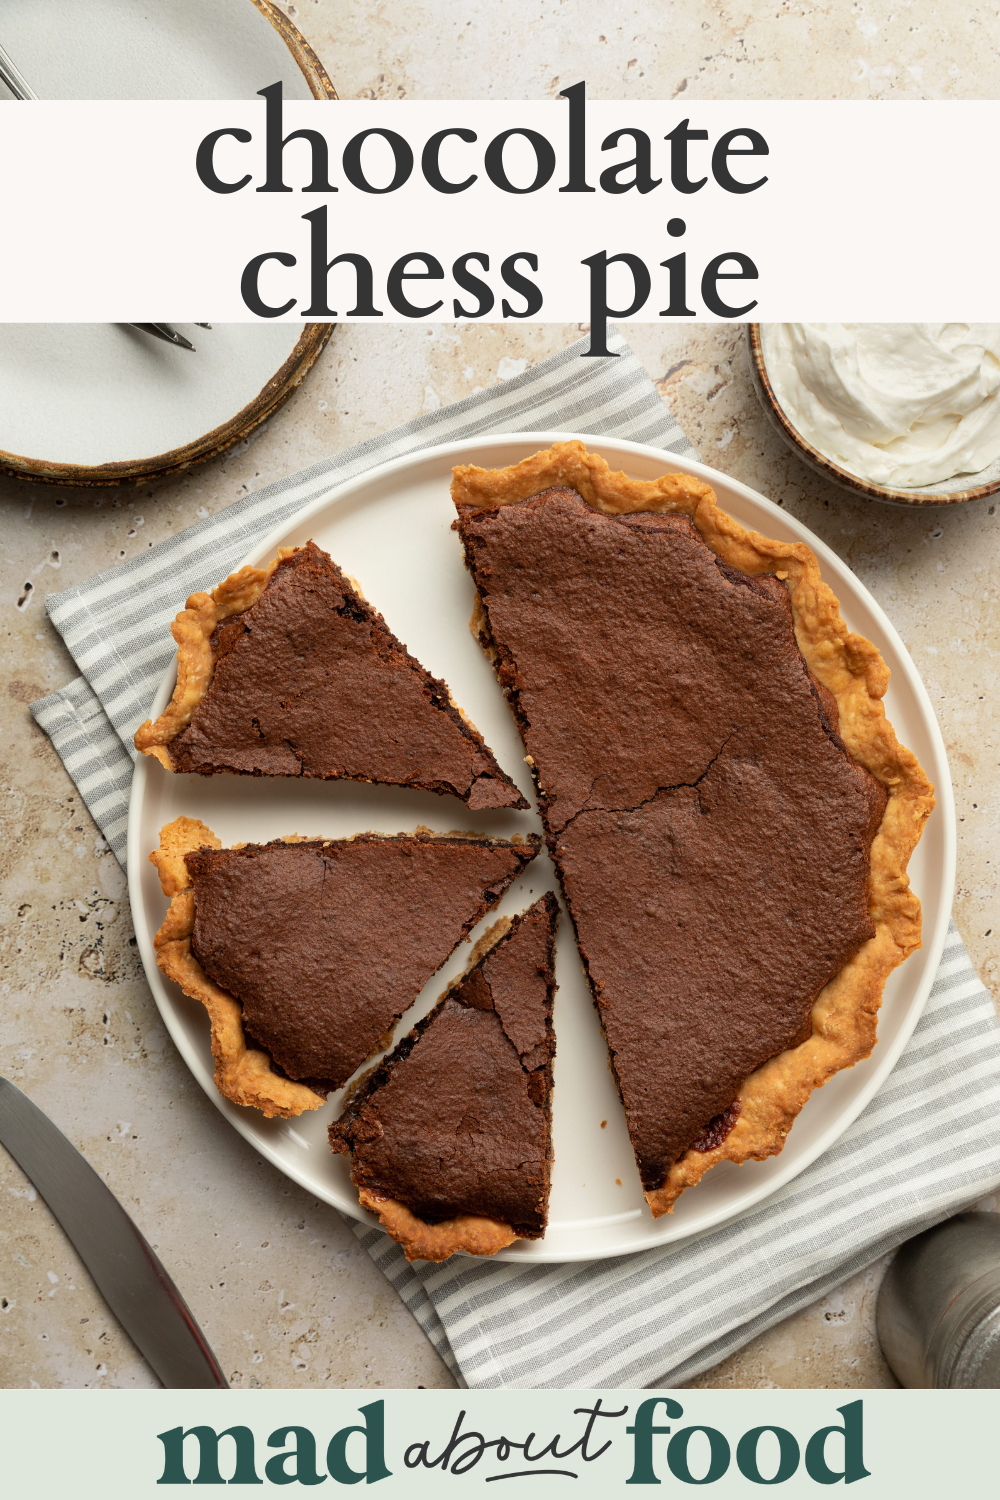 Image for pinning chocolate chess pie recipe on Pinterest